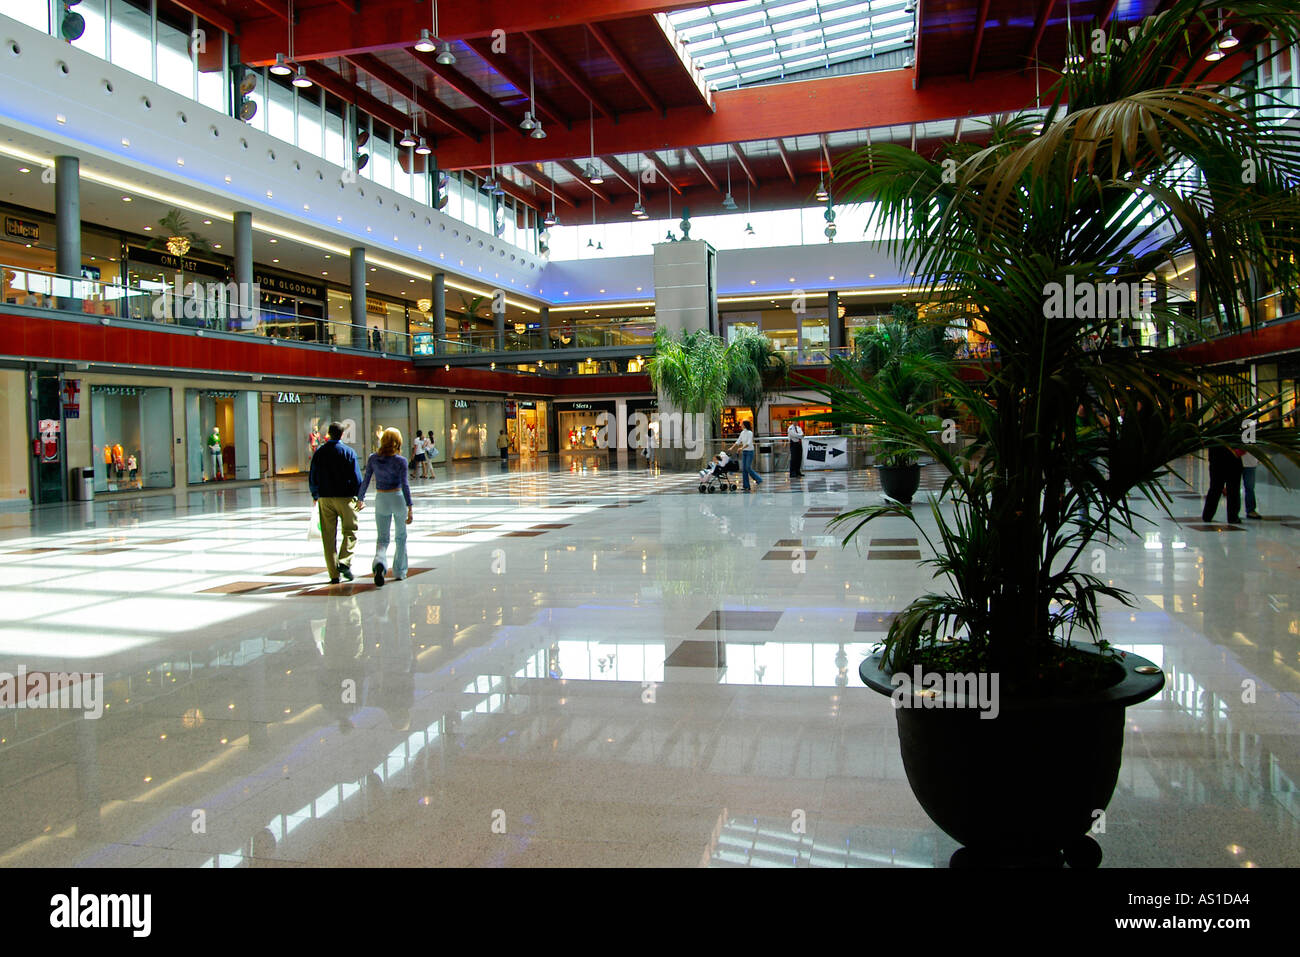 La cañada shopping centre hi-res stock photography and images - Alamy